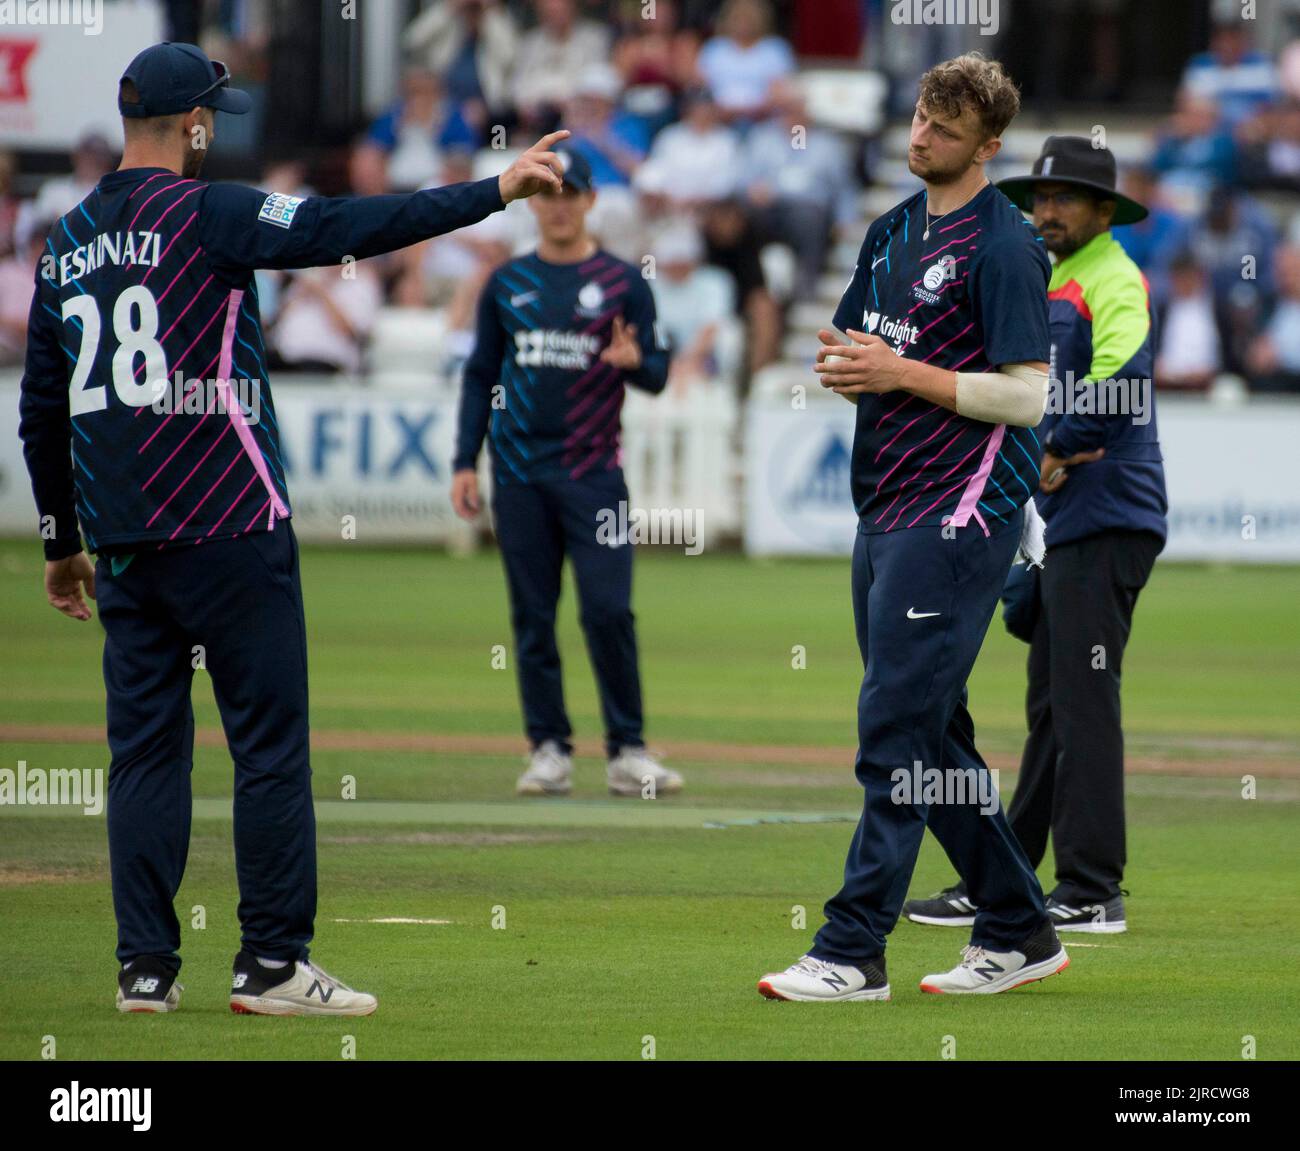 Luke Hollman of Middlesex in a 50 over match against Sussex. Stock Photo